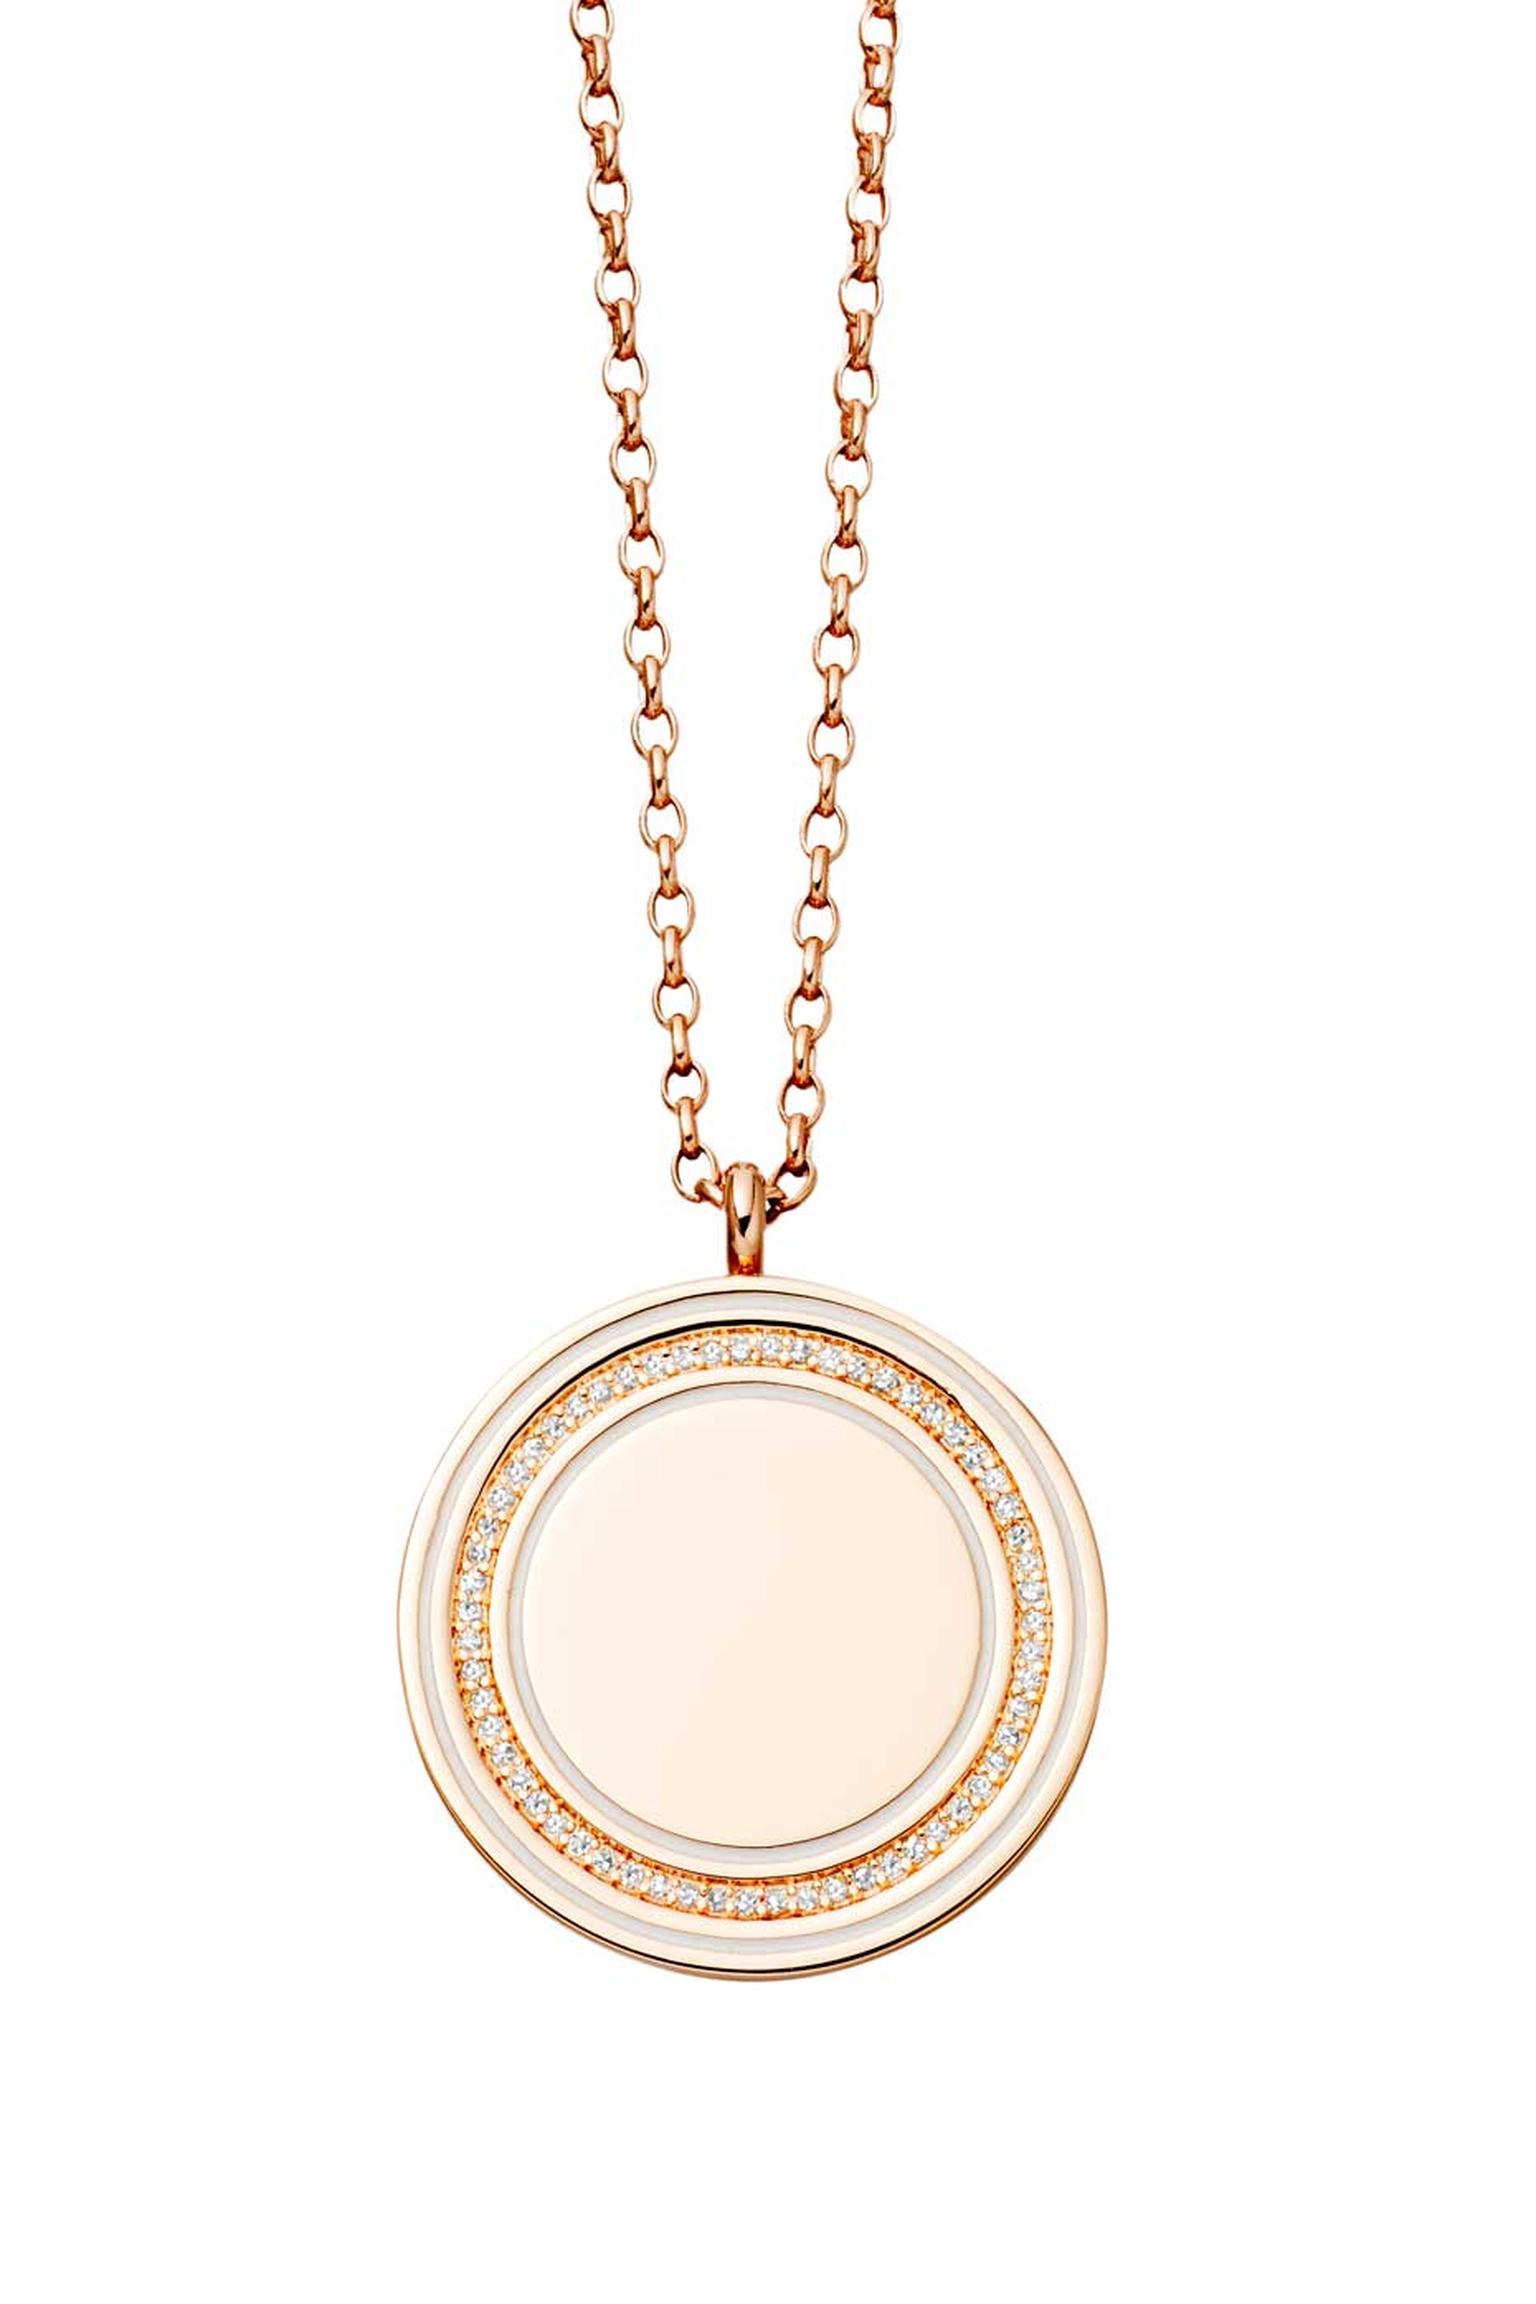 Astley Clarke Giant Moonlight Cosmos locket in rose gold and diamonds (£1,950).